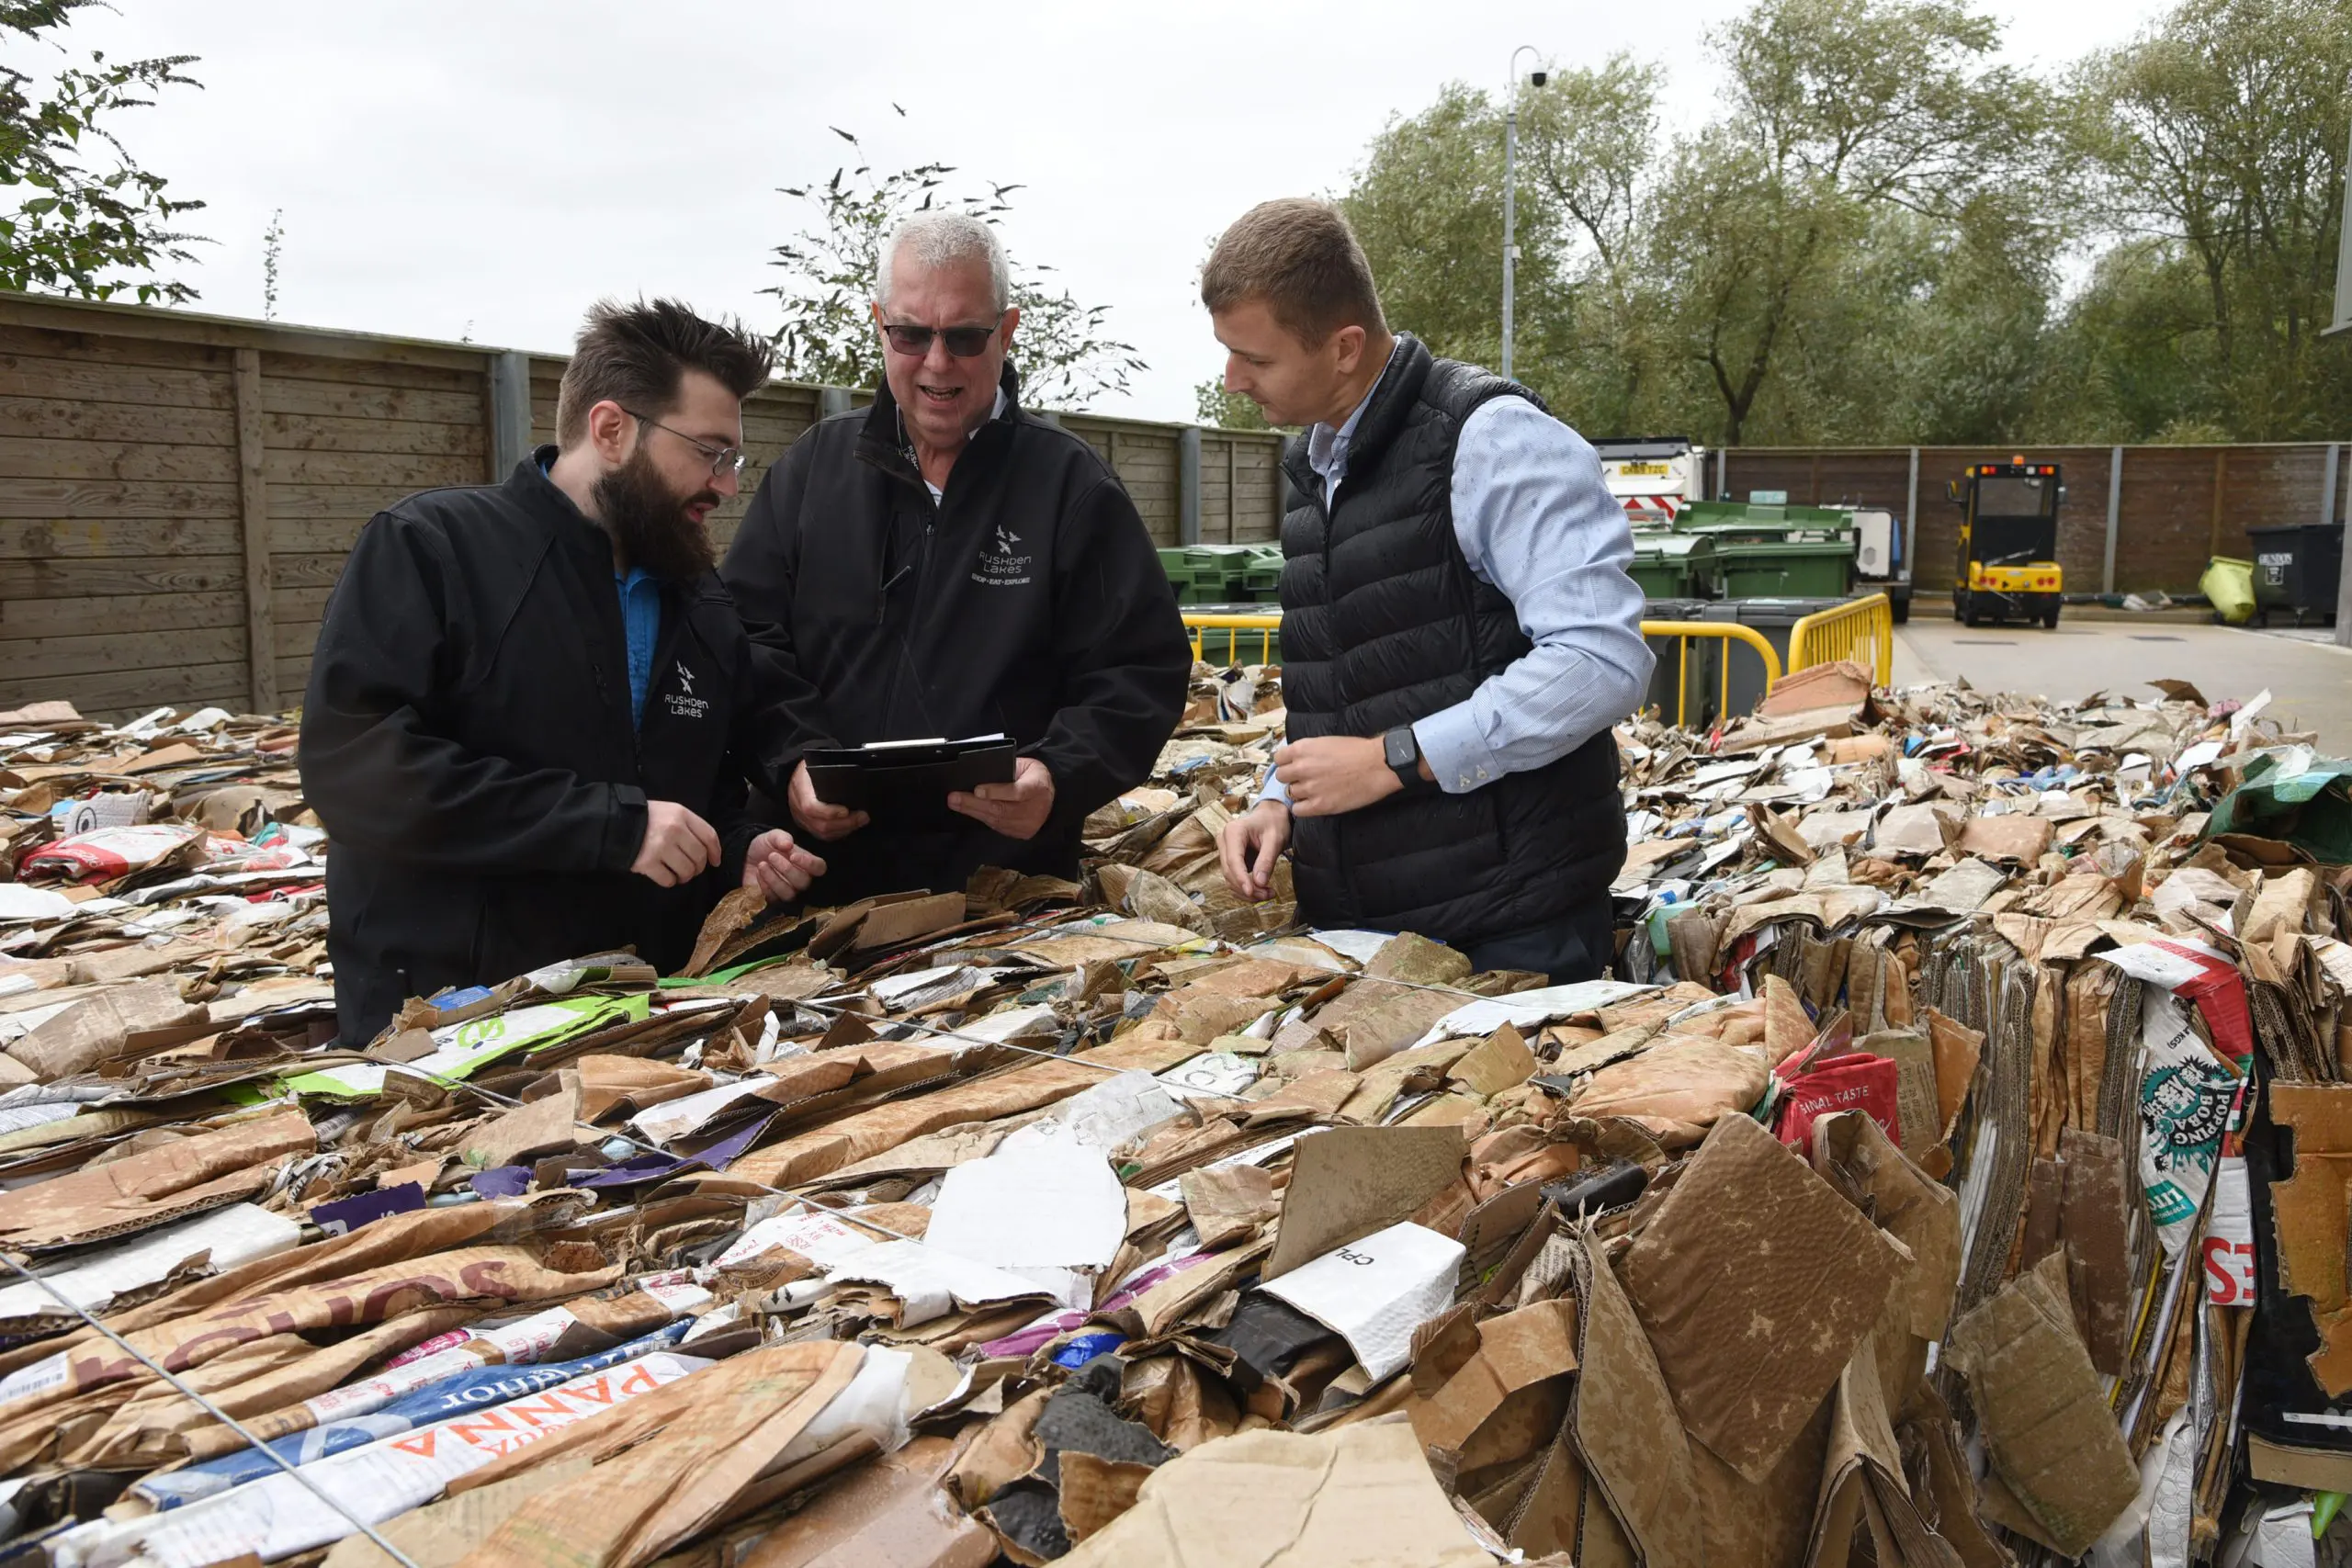 Thousands of kgs of cardboard are segregated and sent for recycling: pictured (l-r) Jamie Denney, Alan Rademaker and James Luckett